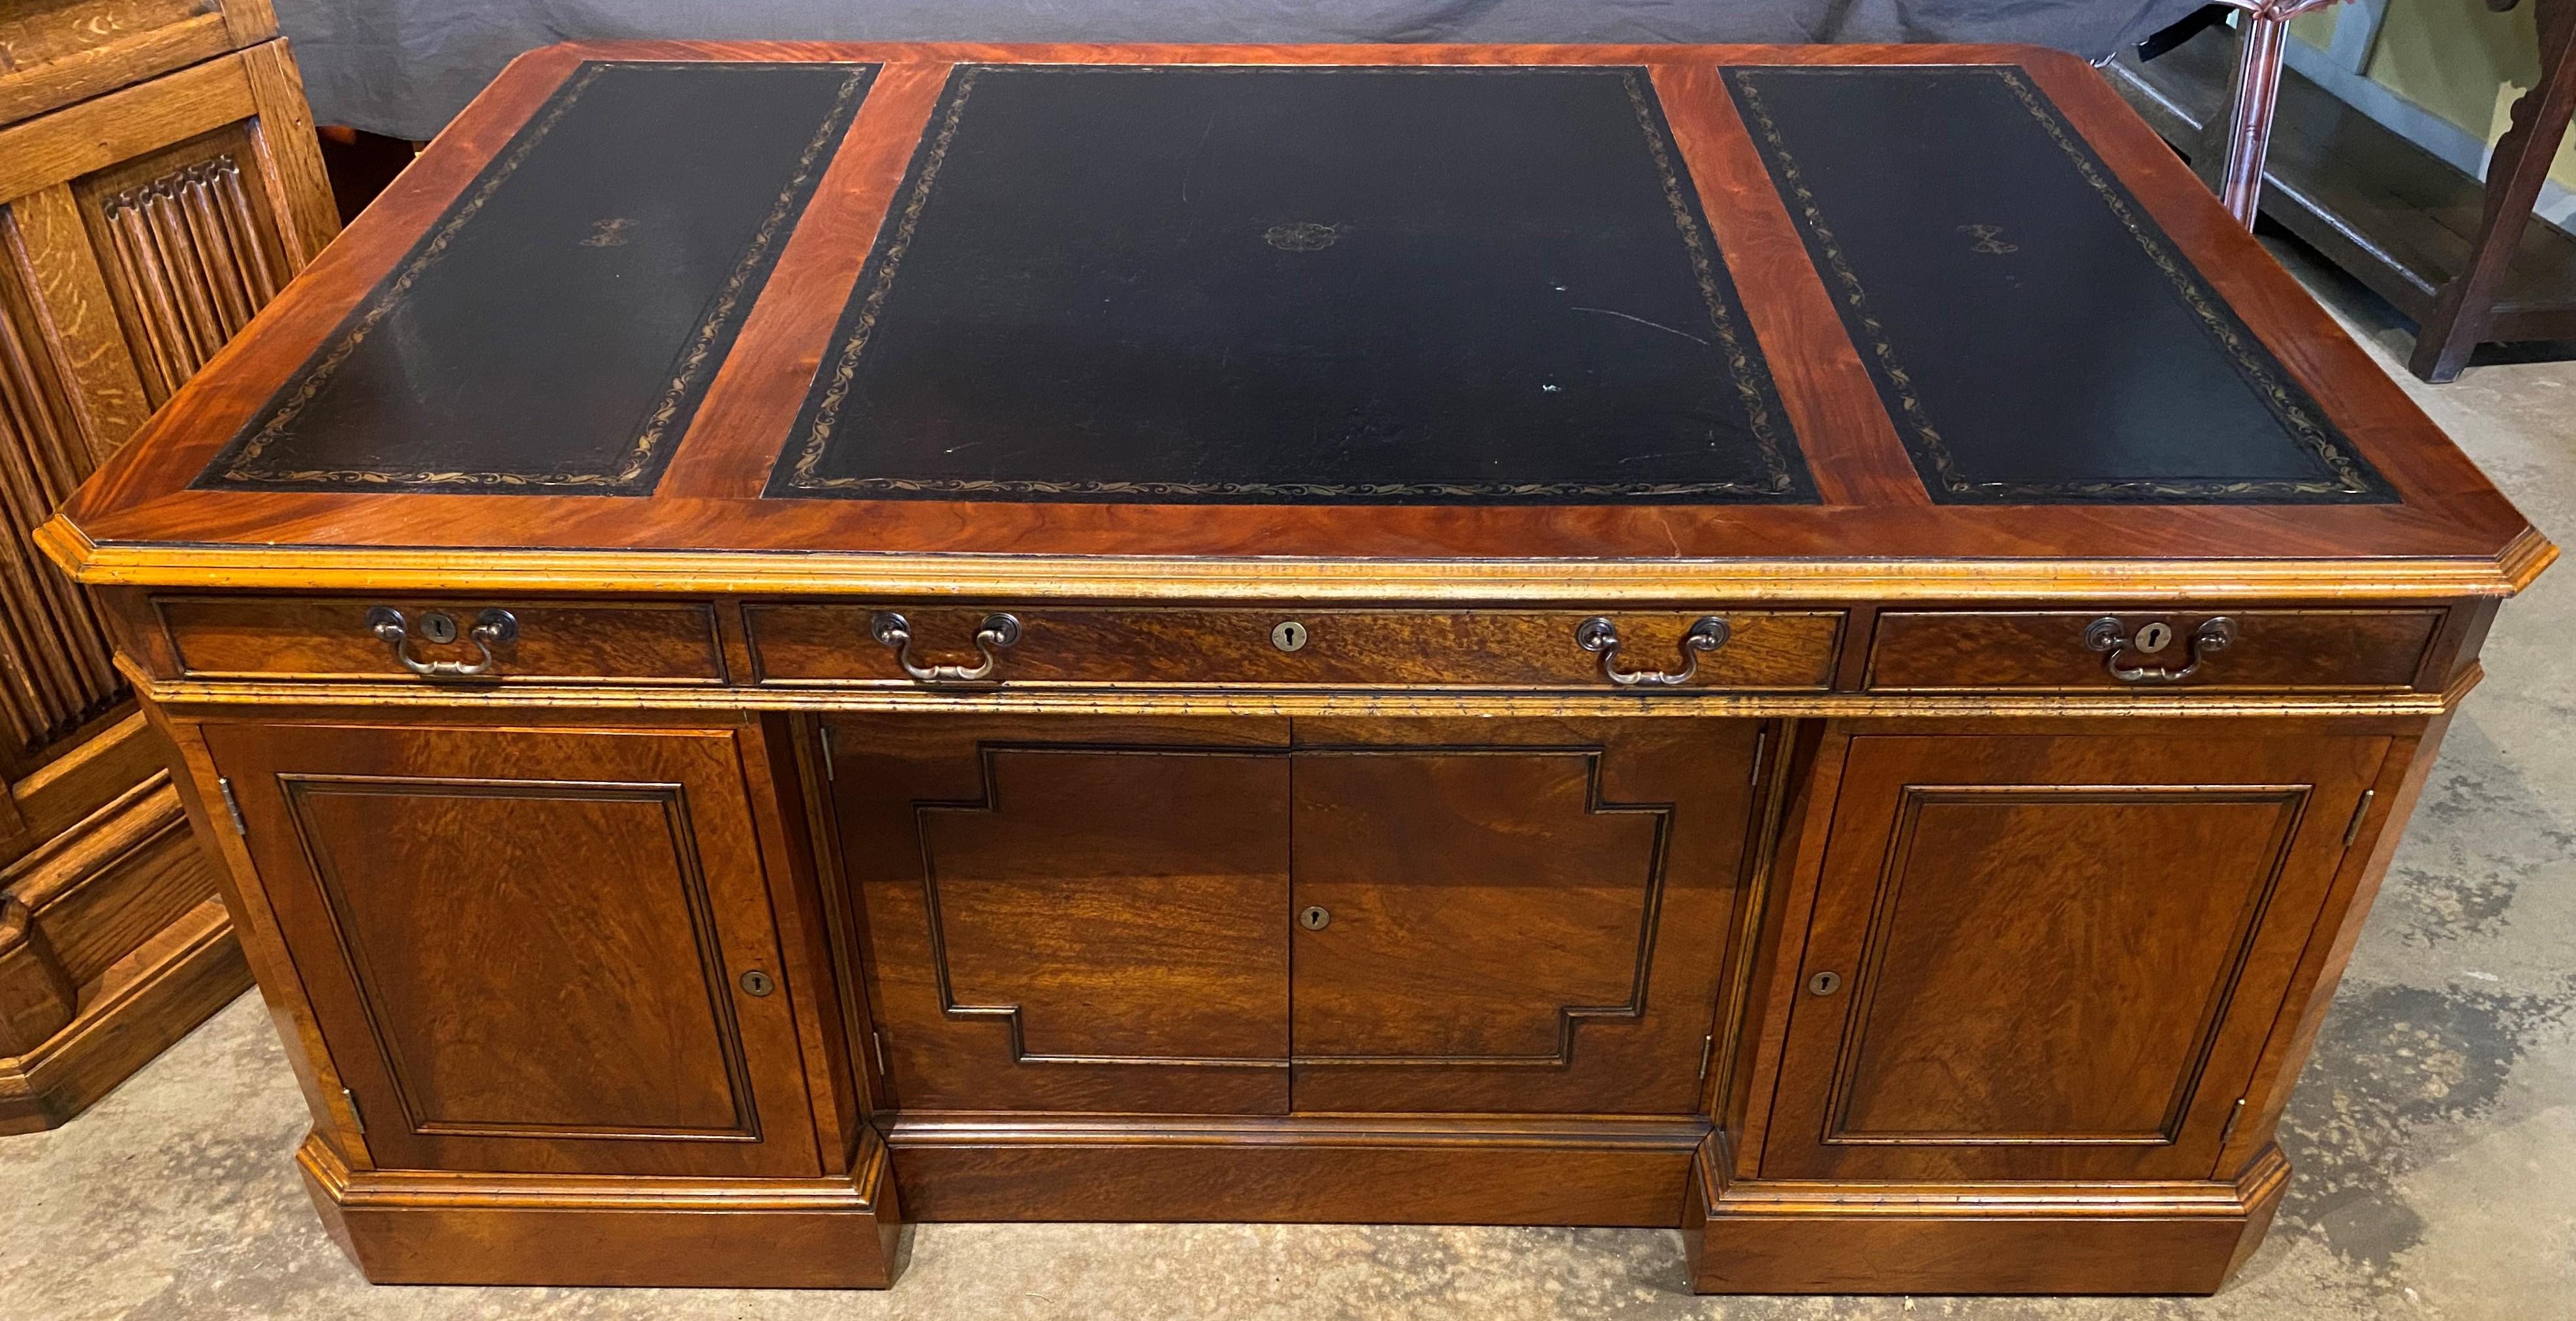 A fine mahogany and burled walnut veneered partners desk with three section tooled black leather top with molded edge and canted corners, with three fitted front frieze drawers over a two paneled door center front storage compartment flanked by